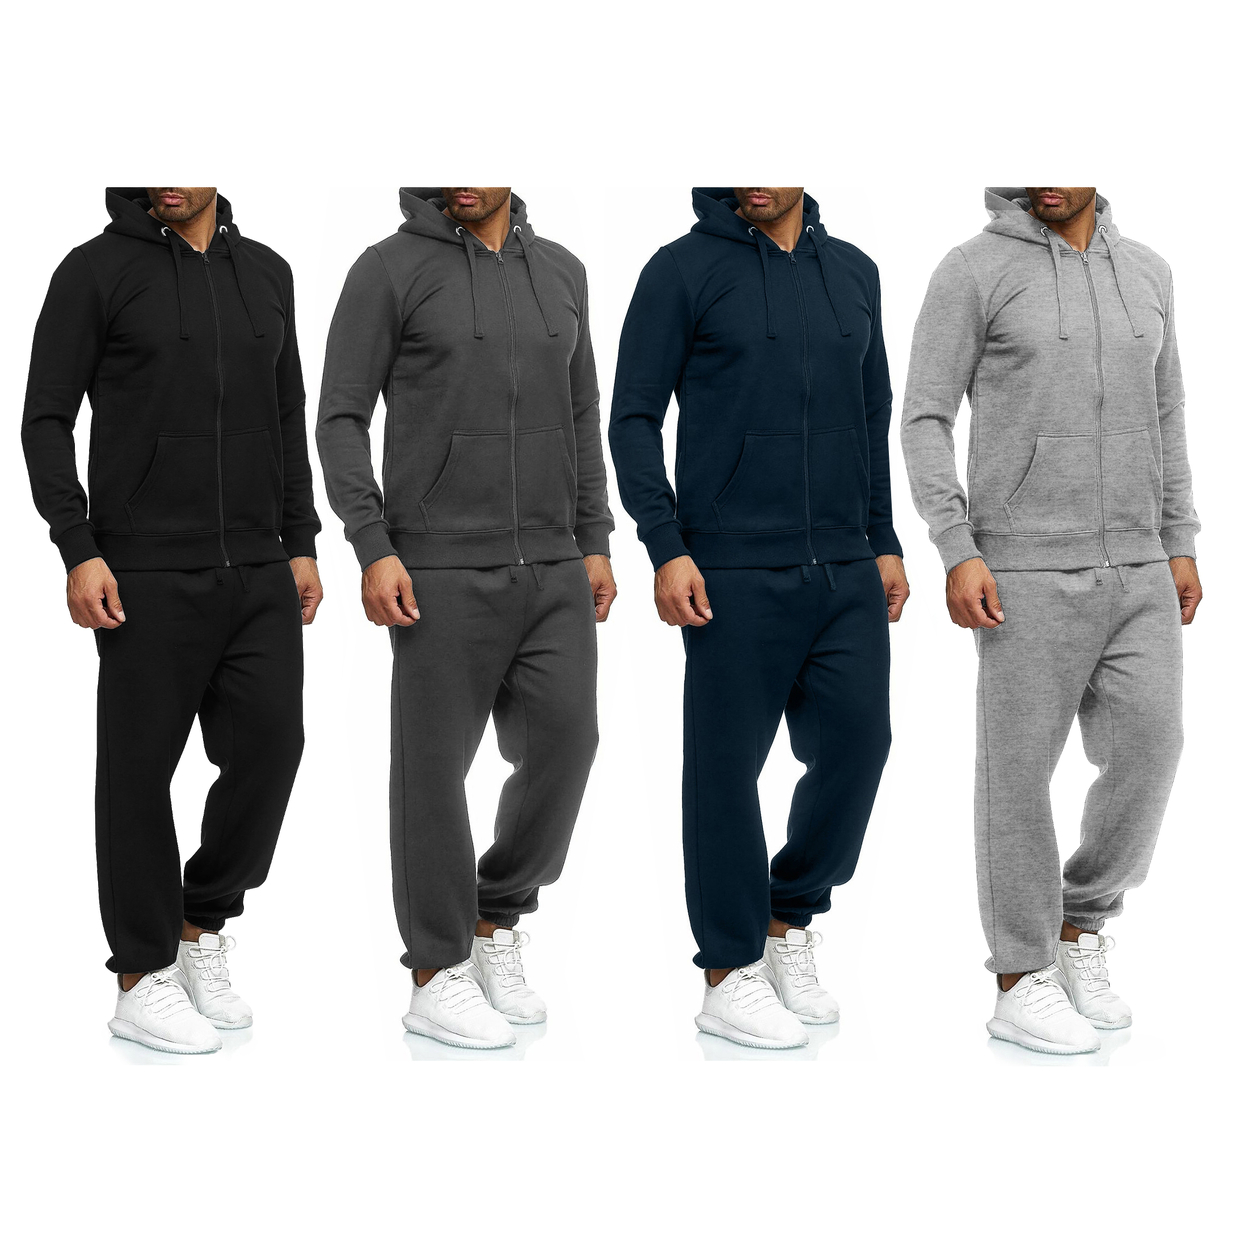 Multi-Pack: Men's Casual Big & Tall Athletic Active Winter Warm Fleece Lined Full Zip Tracksuit Jogger Set - Black, 1-pack, Small